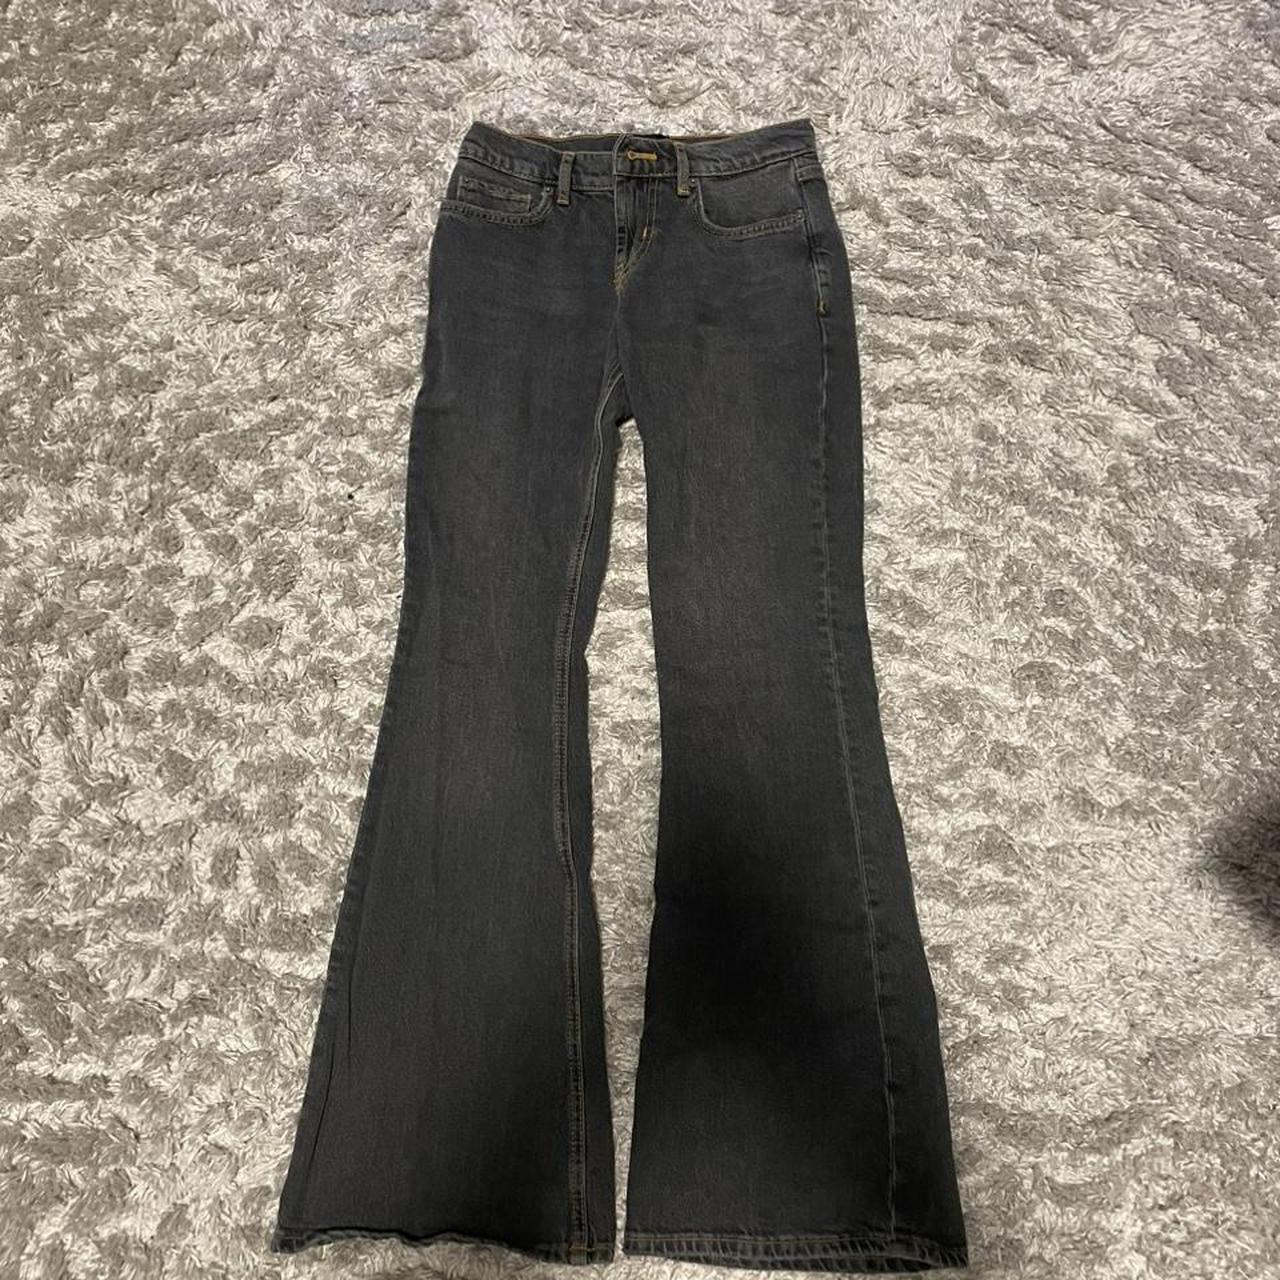 Black Urban Outfitters Flare Jeans - Depop